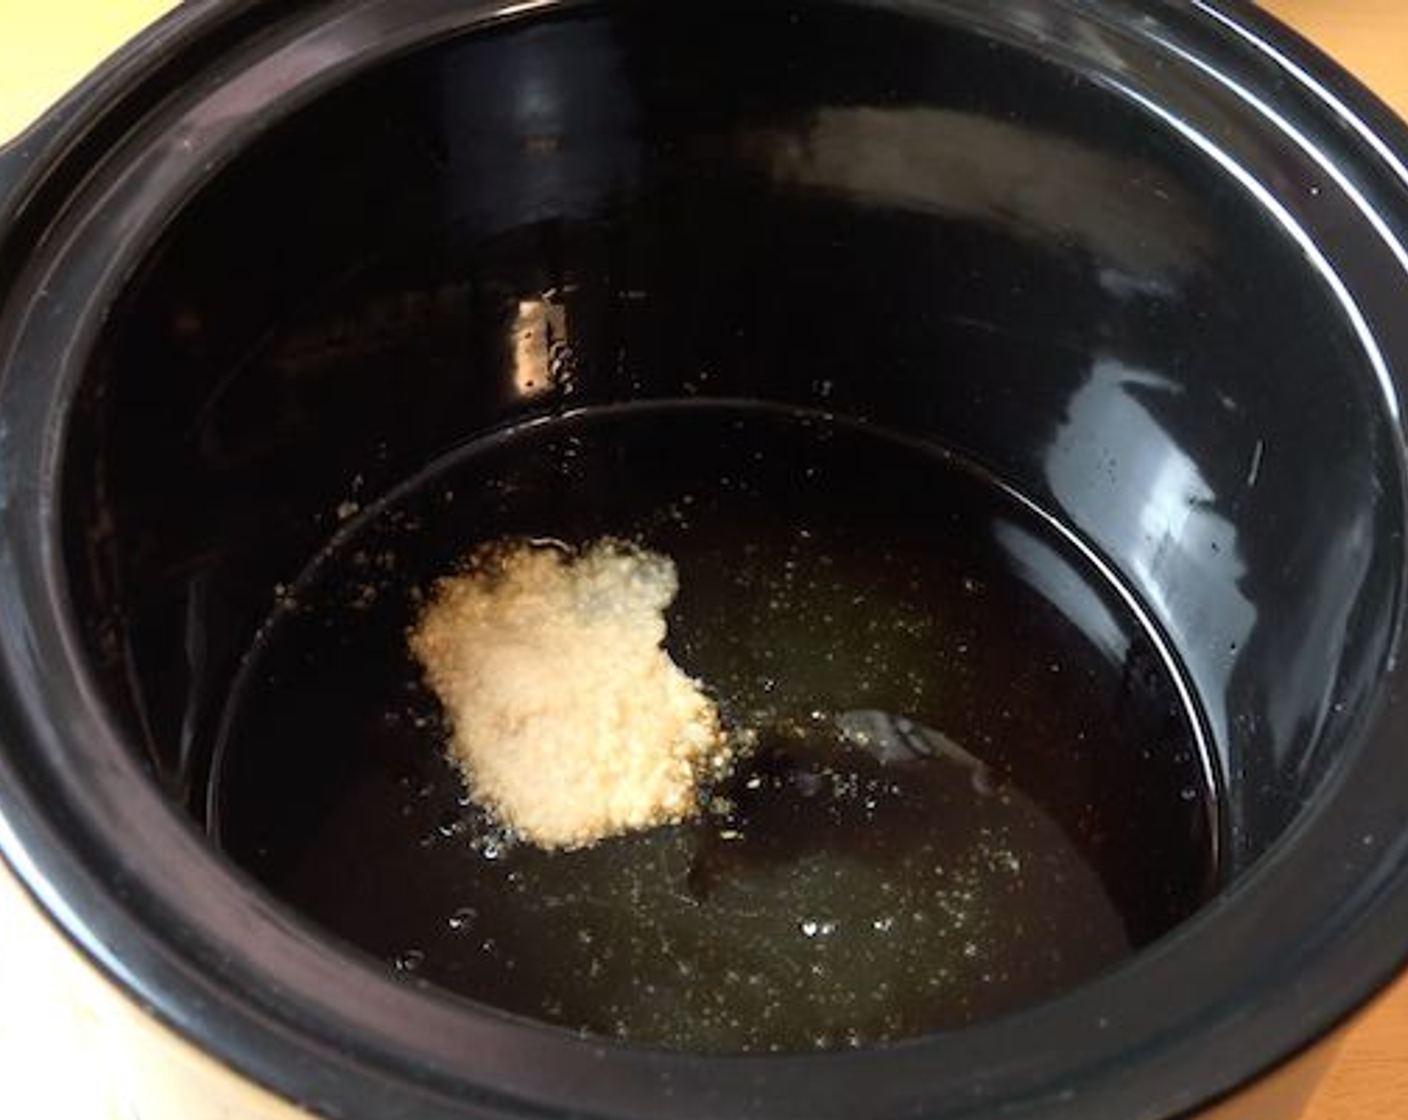 step 2 Into your slow cooker, add Honey (1 cup), Soy Sauce (1/2 cup) and Garlic (2 cloves). Mix everything together.